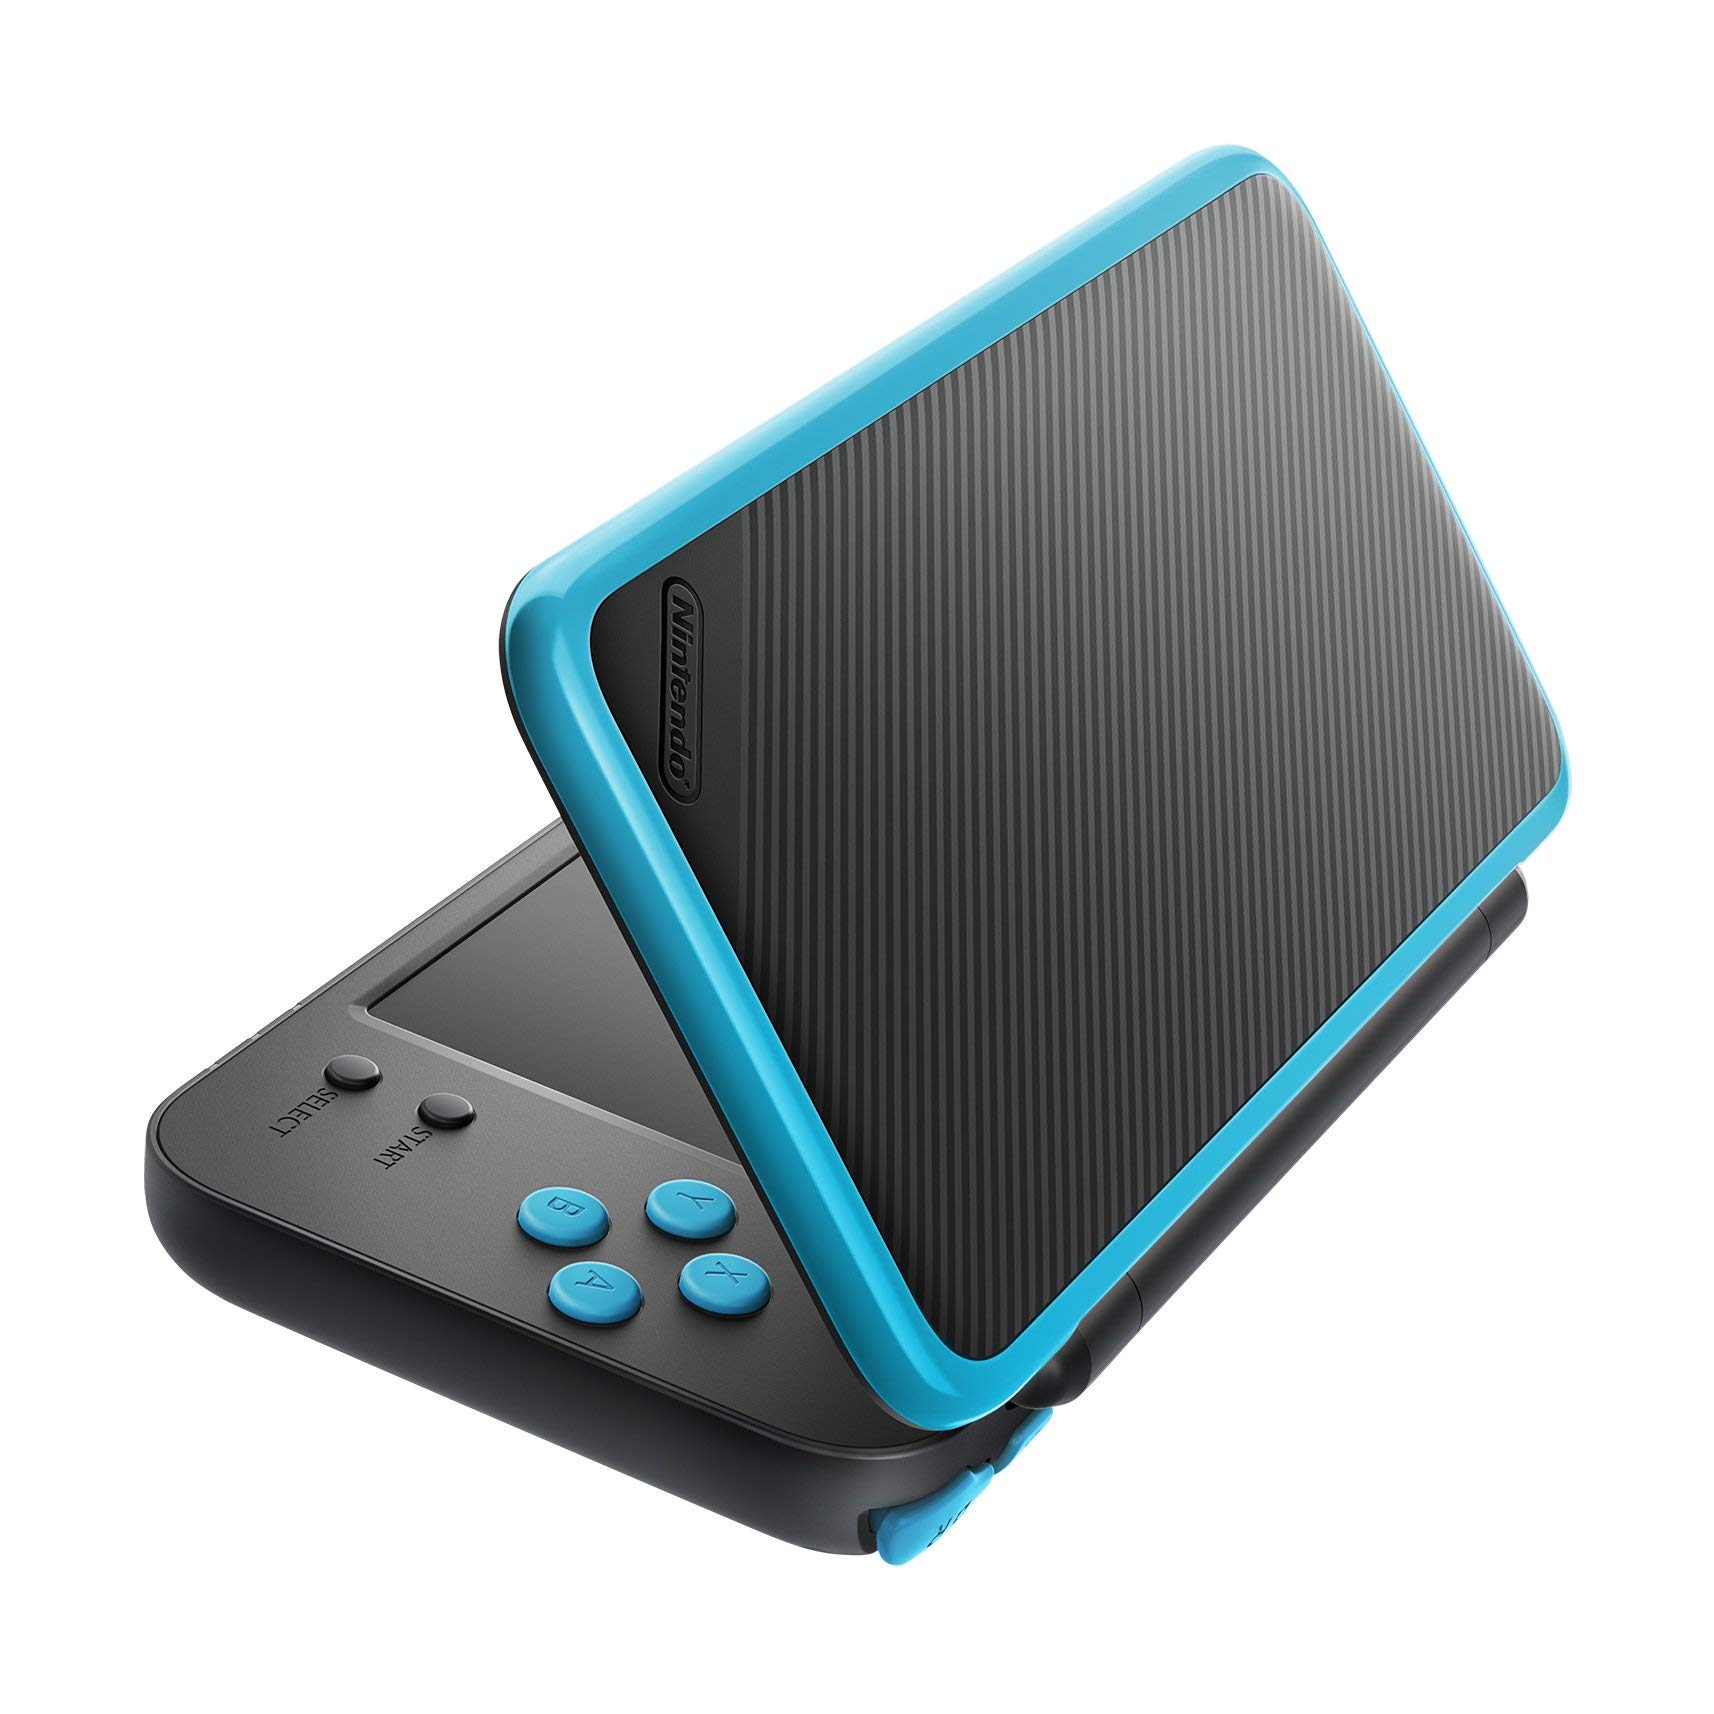 New Nintendo 2DS XL - Black + Turquoise With Mario Kart 7 Pre-installed - Nintendo 2DS (Renewed)